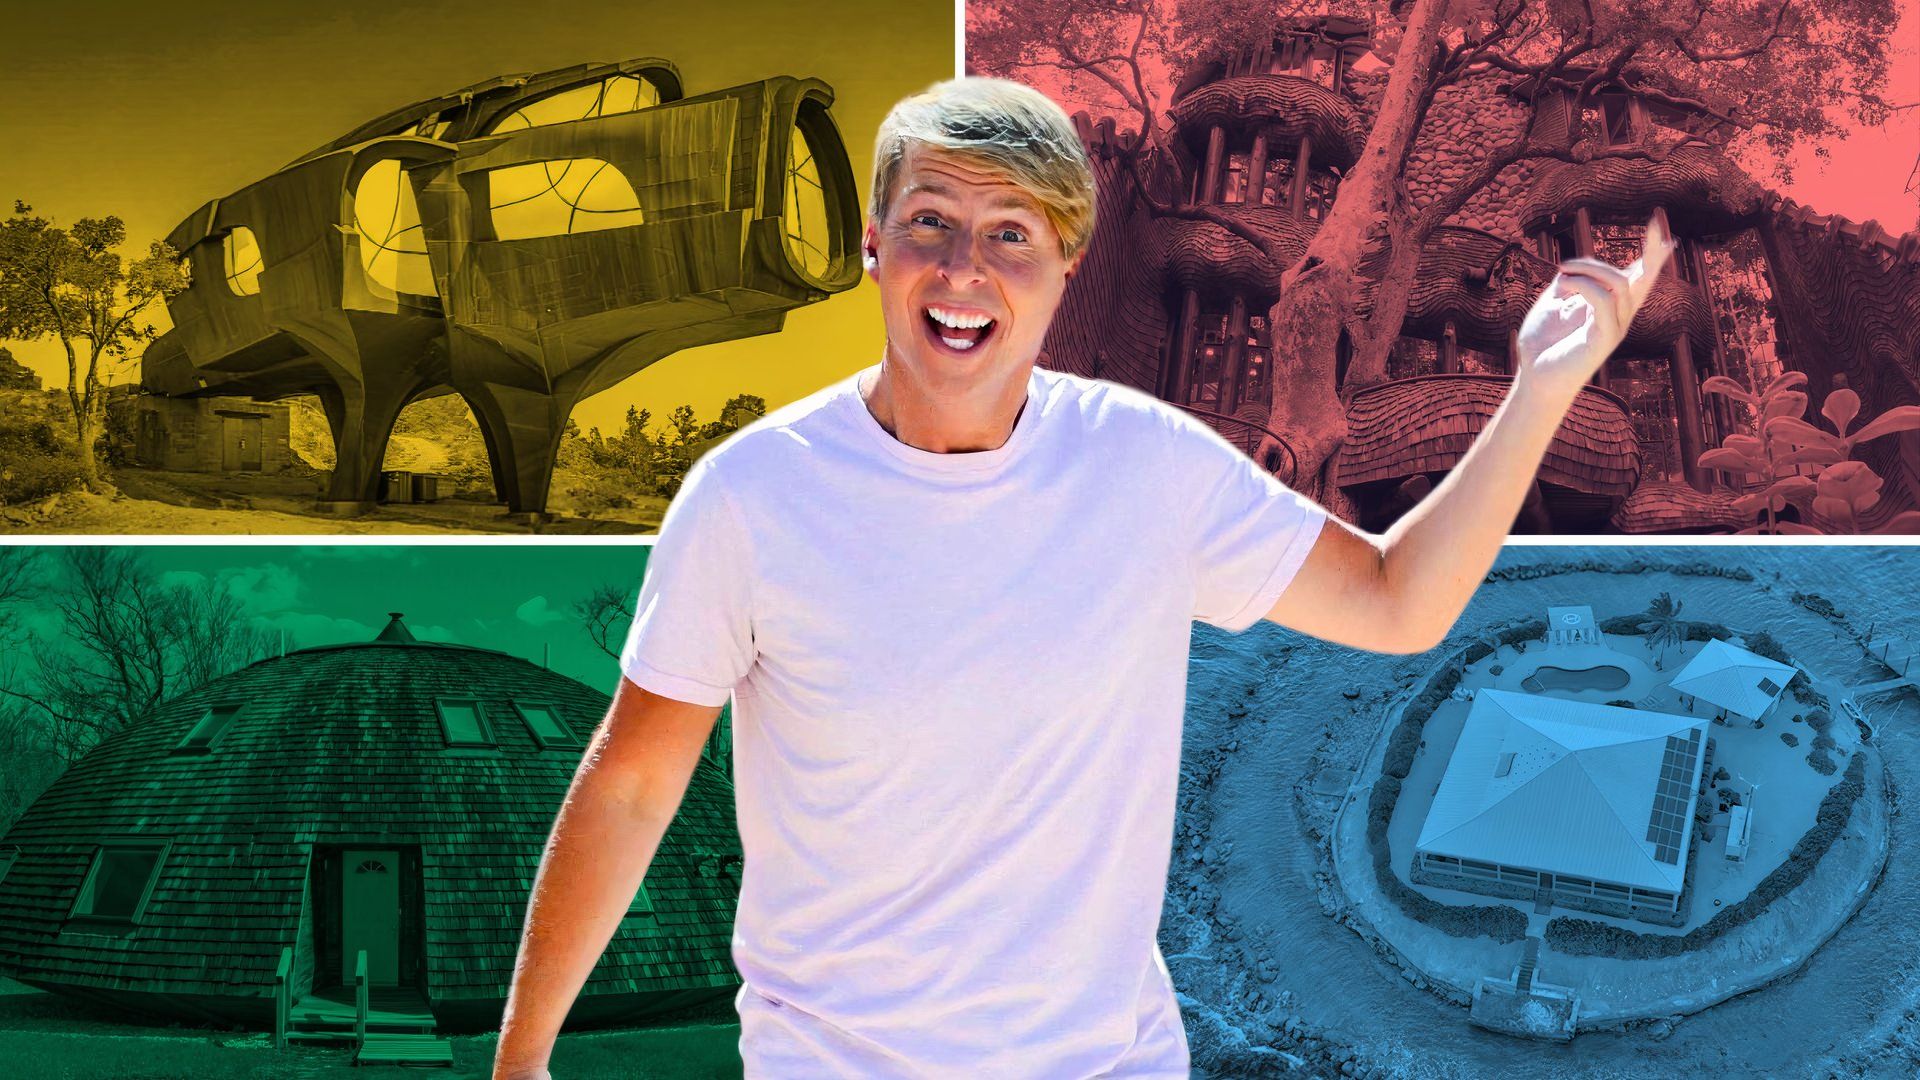 An edited image of Jack McBrayer wearing a white t-shirt with different houses behind him in Zillo Gone Wild